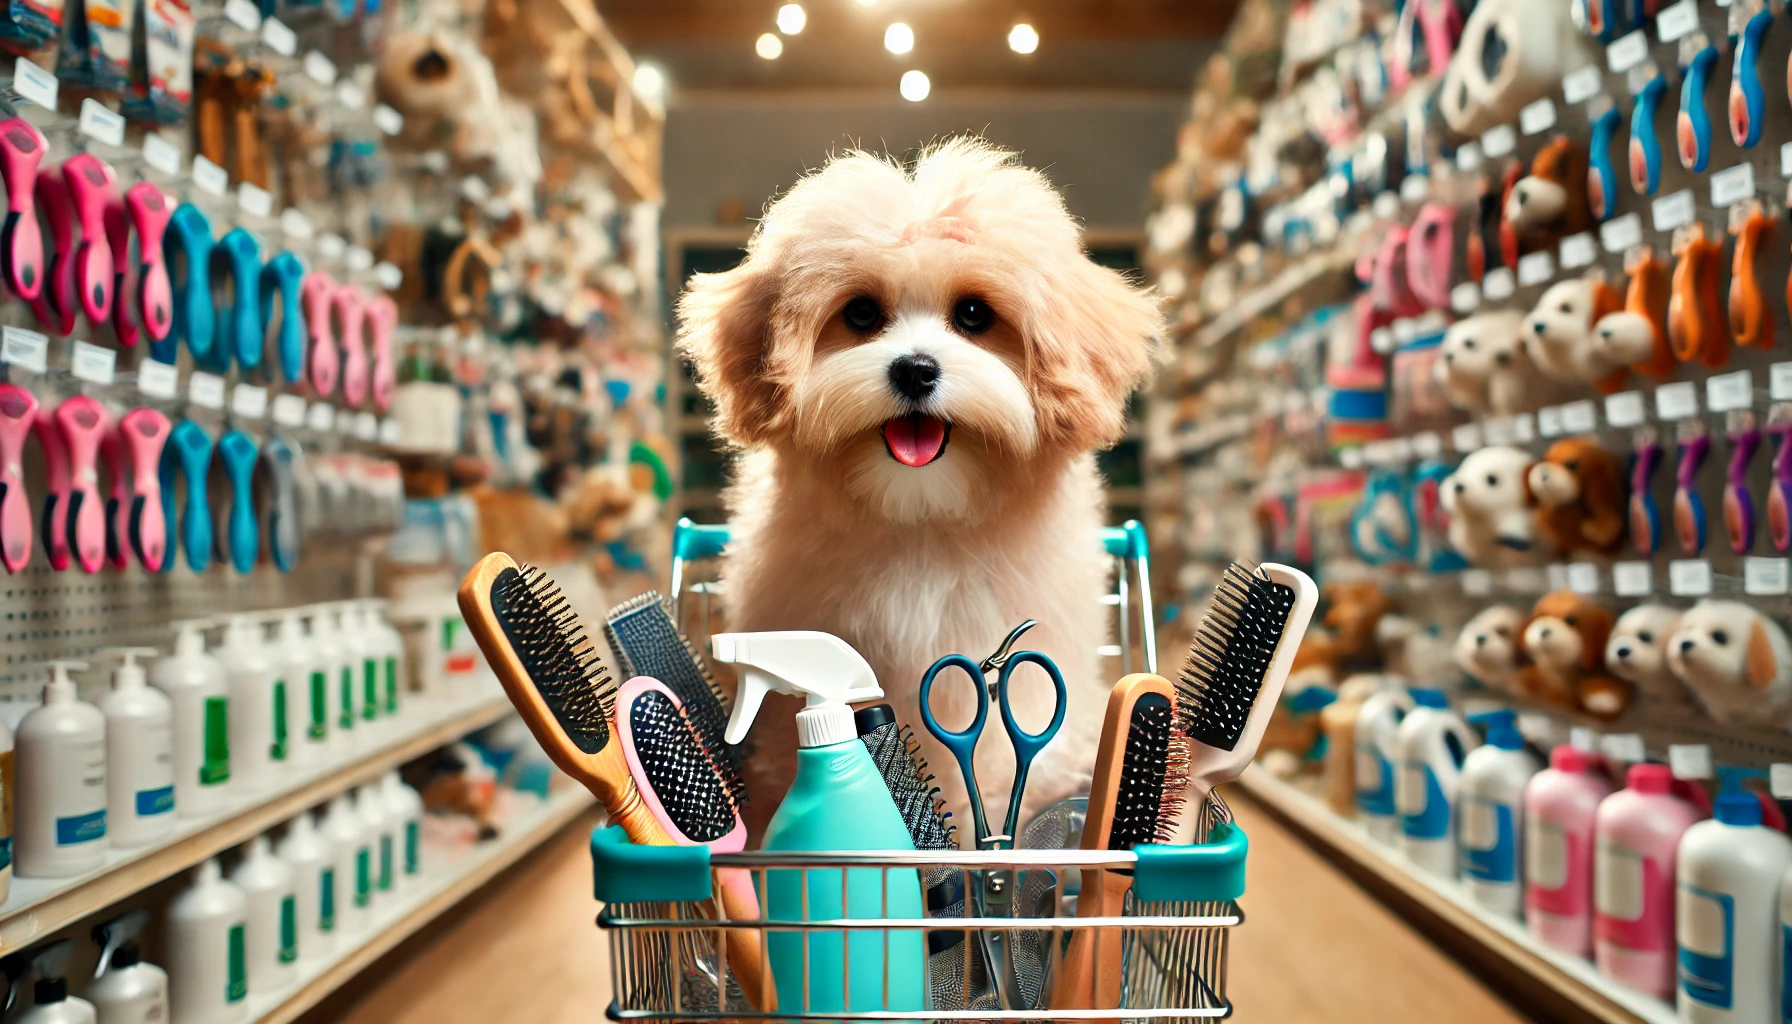 image of a small Maltipoo sitting in a shopping cart filled with grooming tools and supplies for dogs